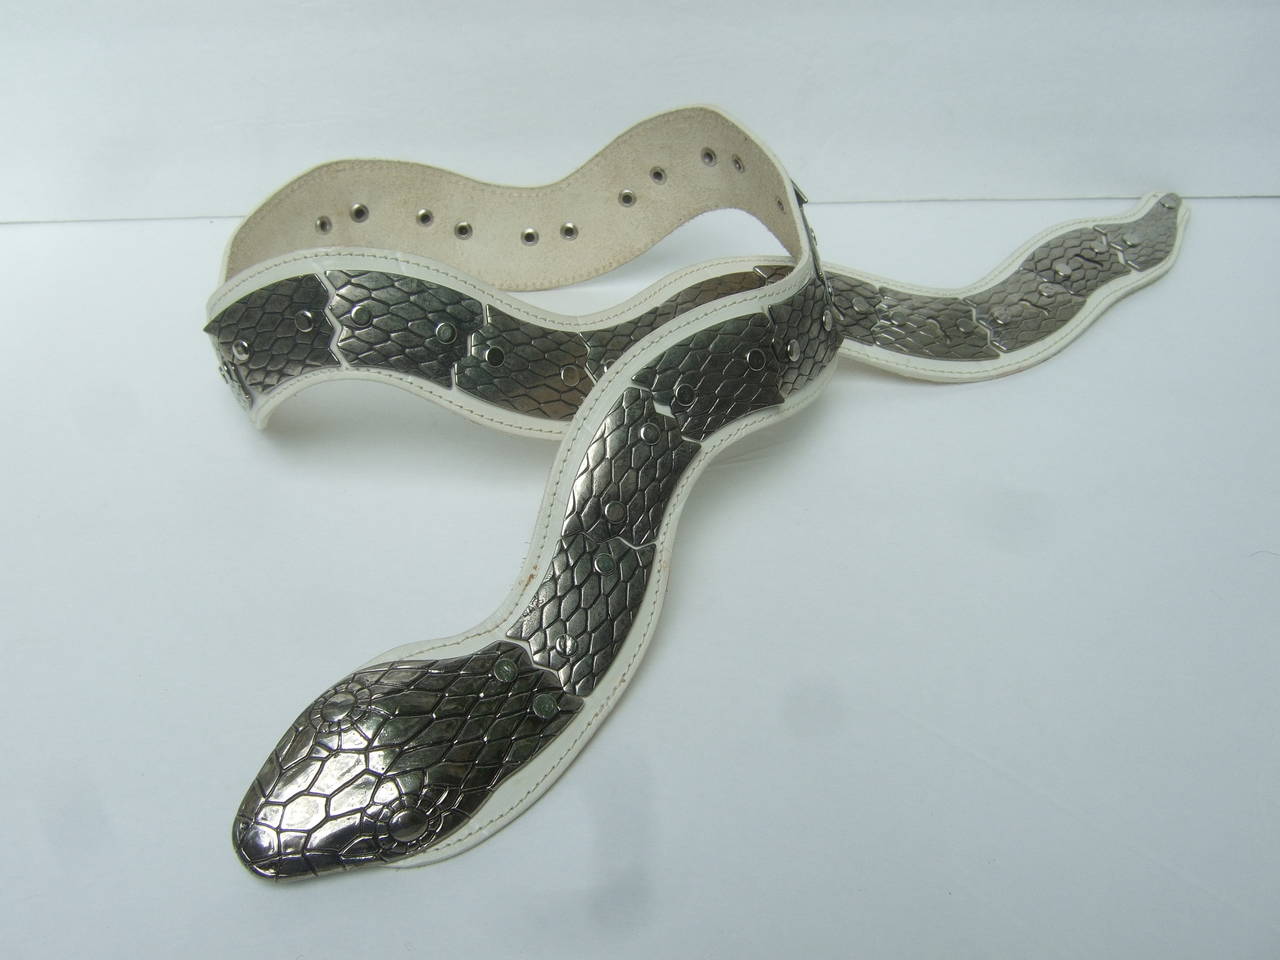 Exotic Italian silver metal articulated white leather snake belt c 1980s
The avant-garde belt is designed with heavy silver metal
links accented with impressed designs that emulate scales

The silver metal articulated links are designed in a